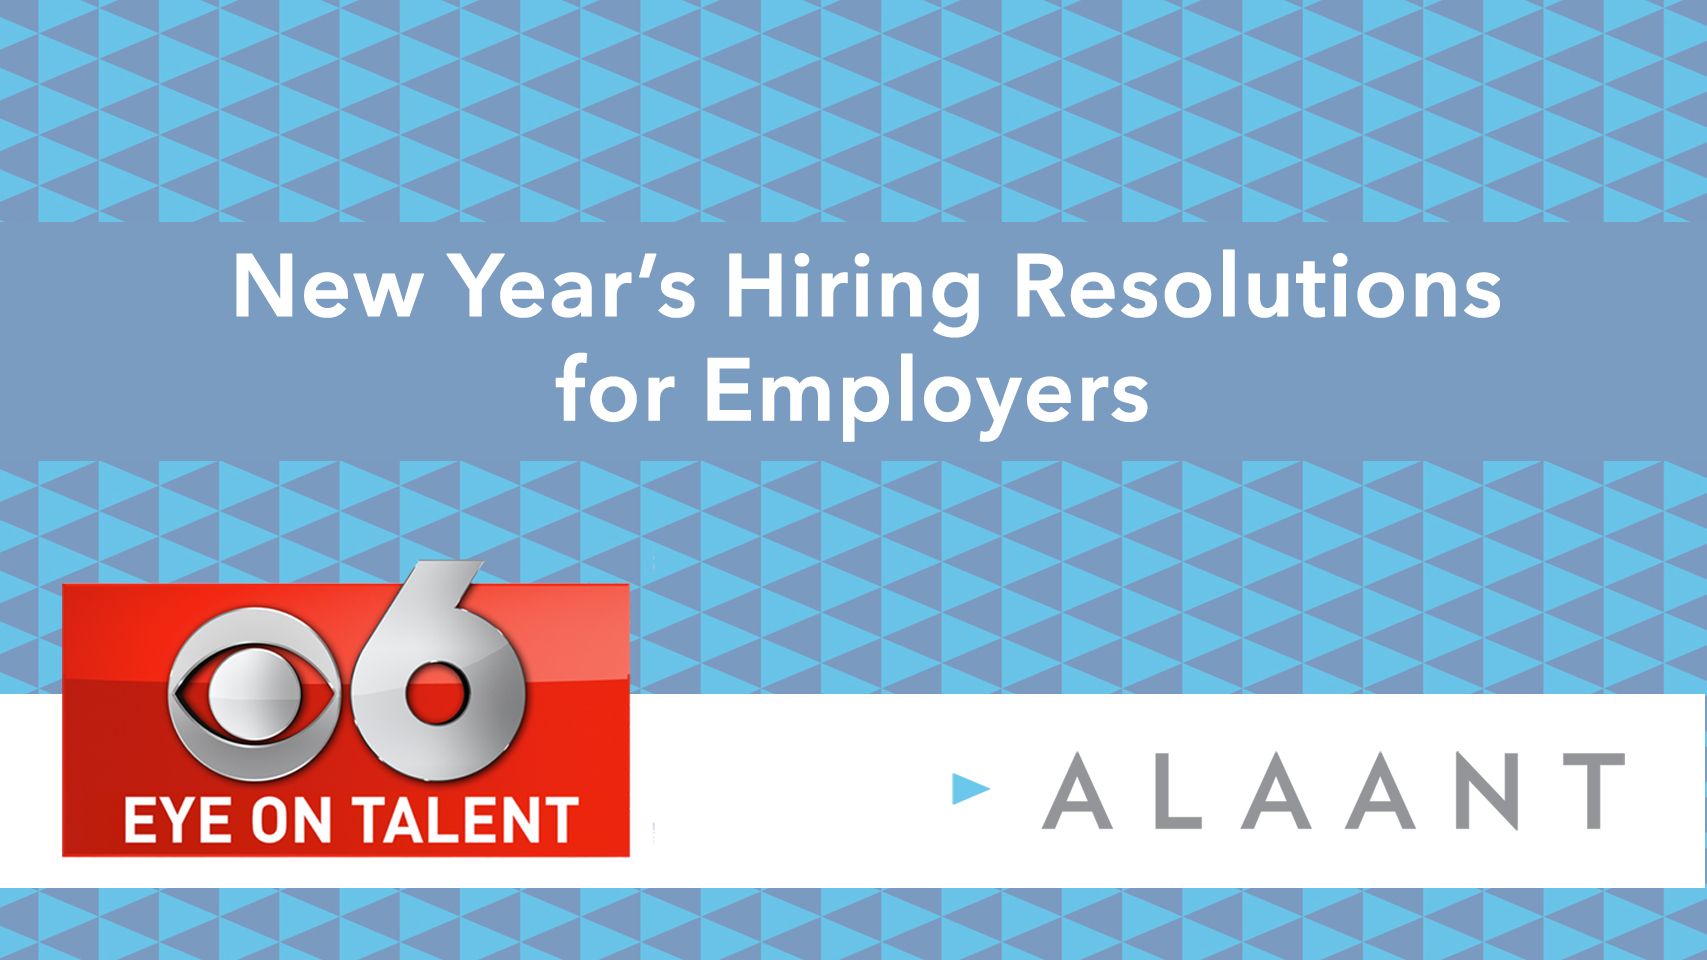 Alaant Eye on Talent New Year’s Hiring Resolutions for Employers